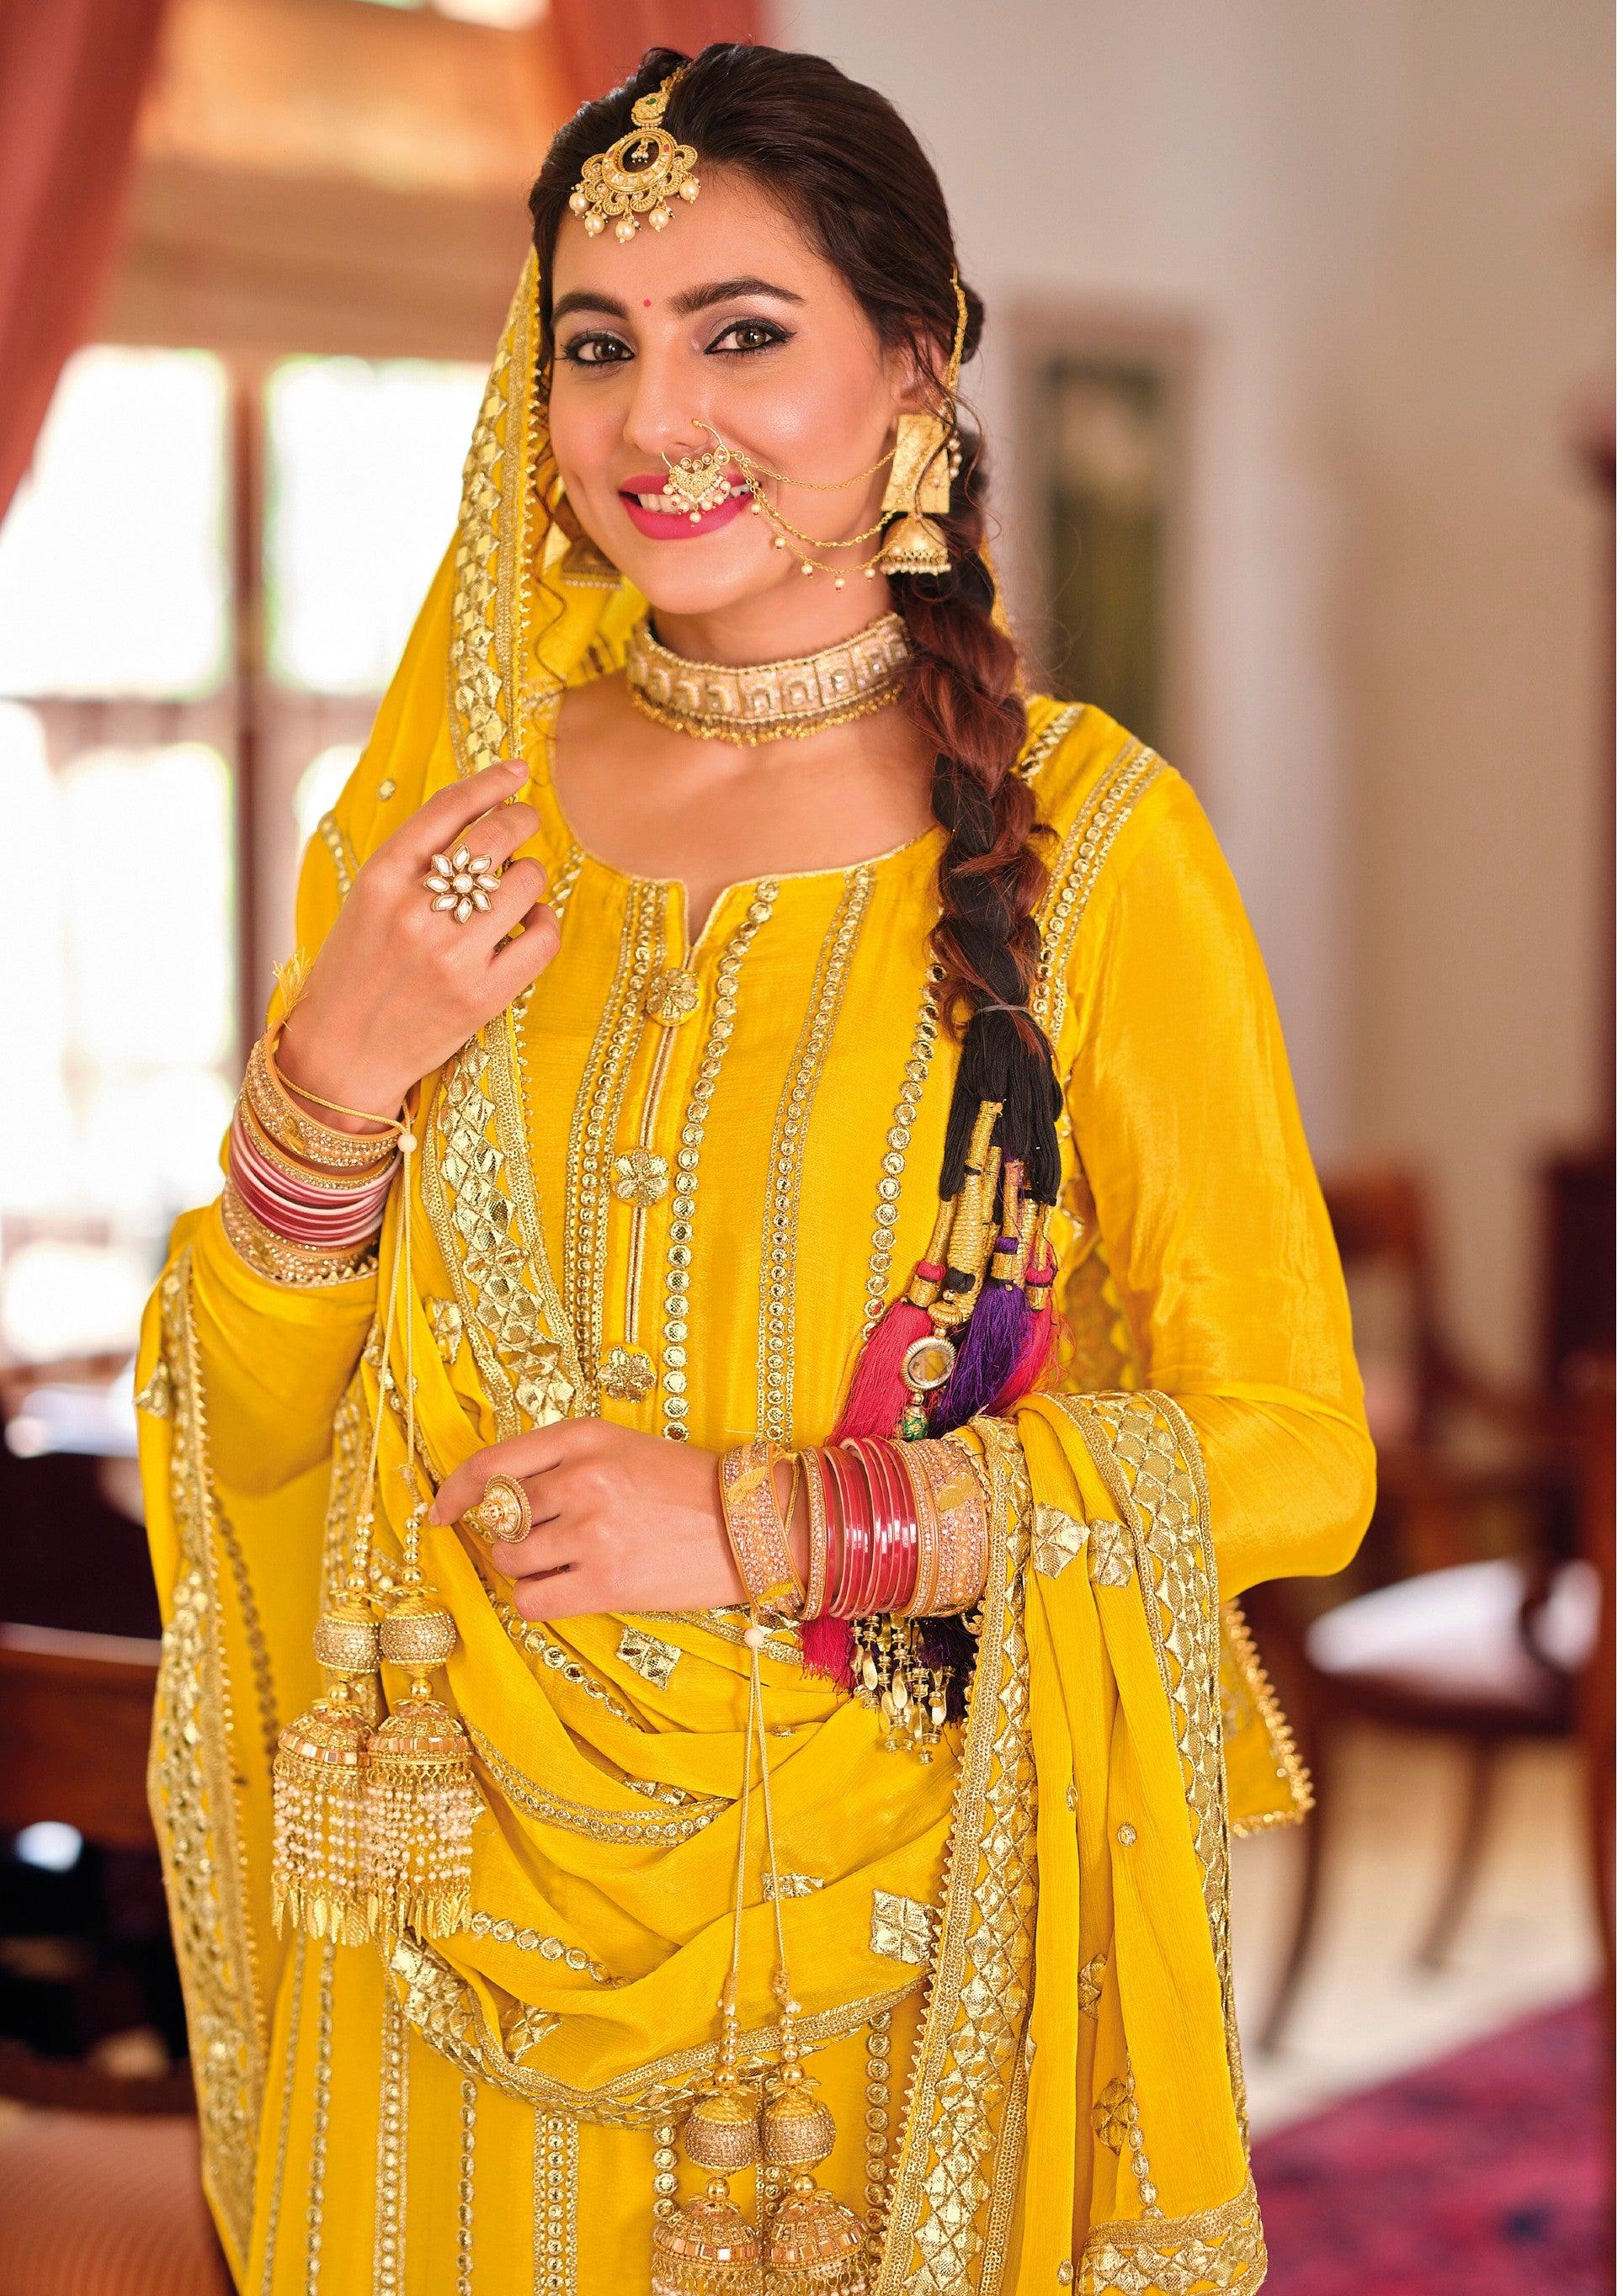 Heavily Embroidered Mustard Yellow Sharara Suit for Haldi - Ethnic Race